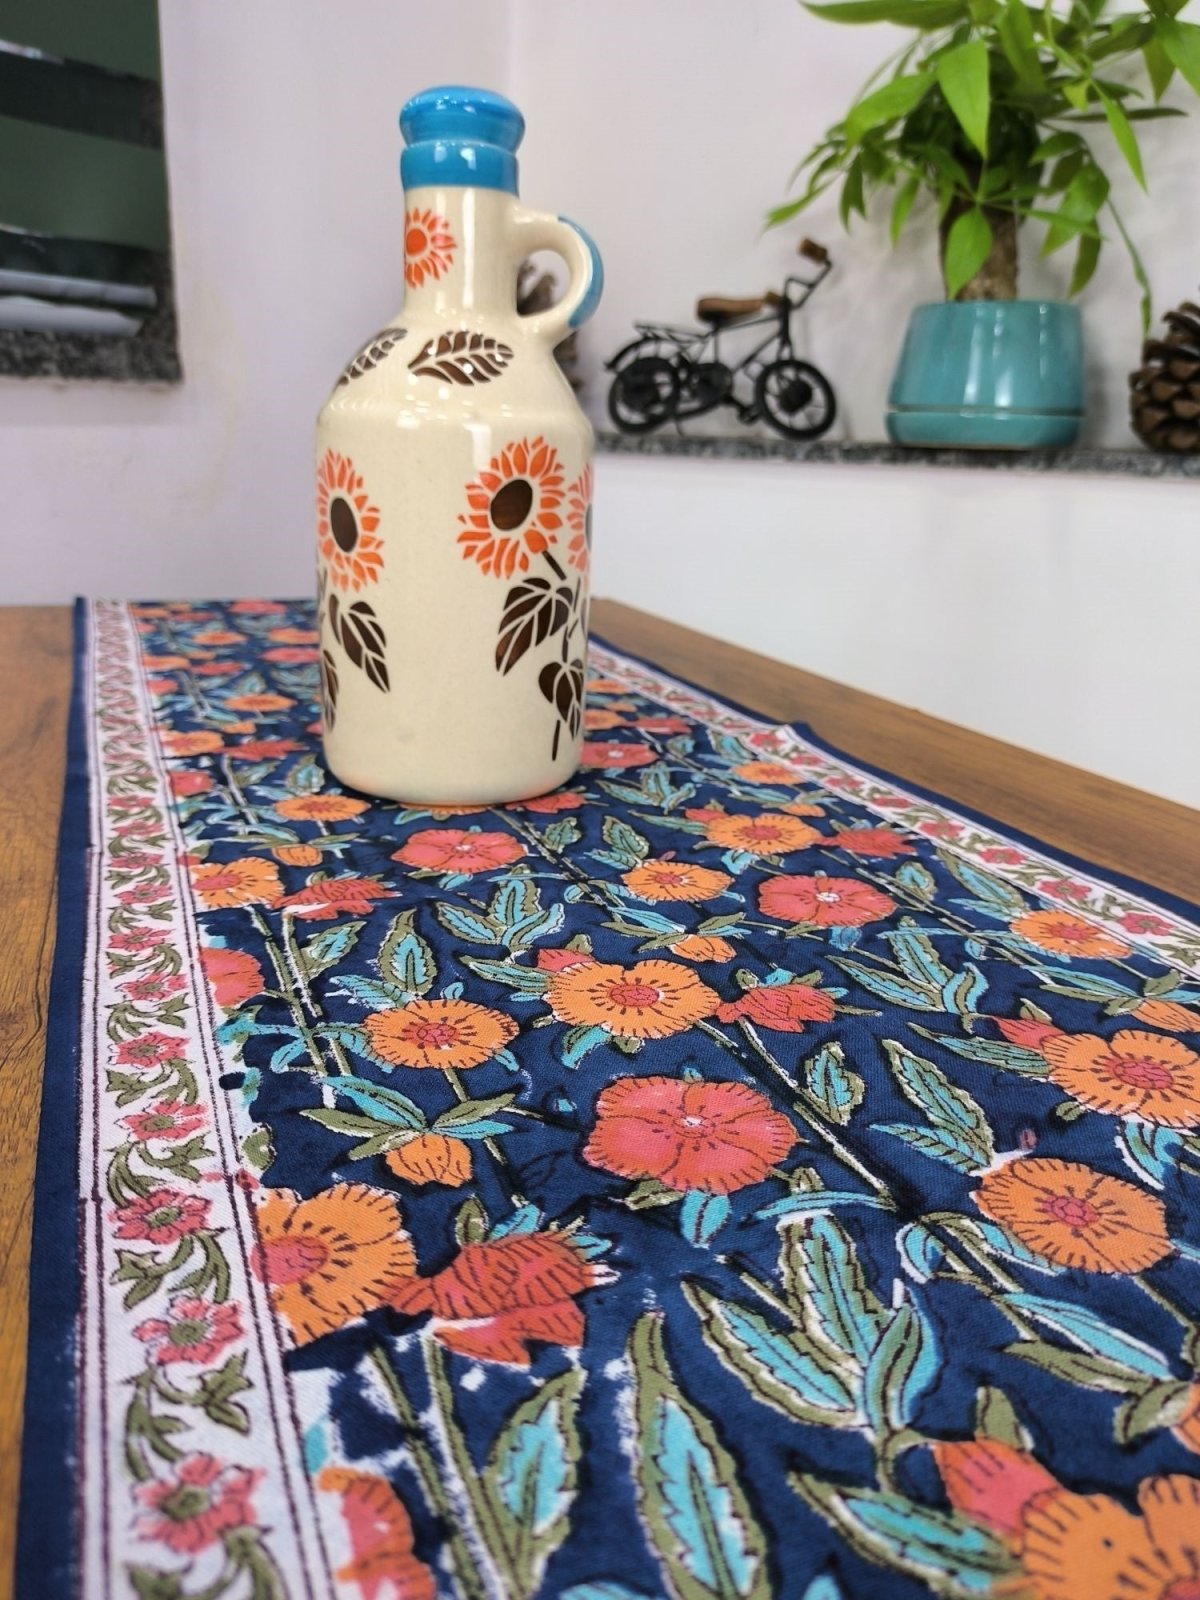 Table Runner 100% Pure Cotton Cloth Border Design | Indian Floral Printed Fall Table Runner | Housewarming Fall Gifts | Mid Night Garden - The Eastern Loom